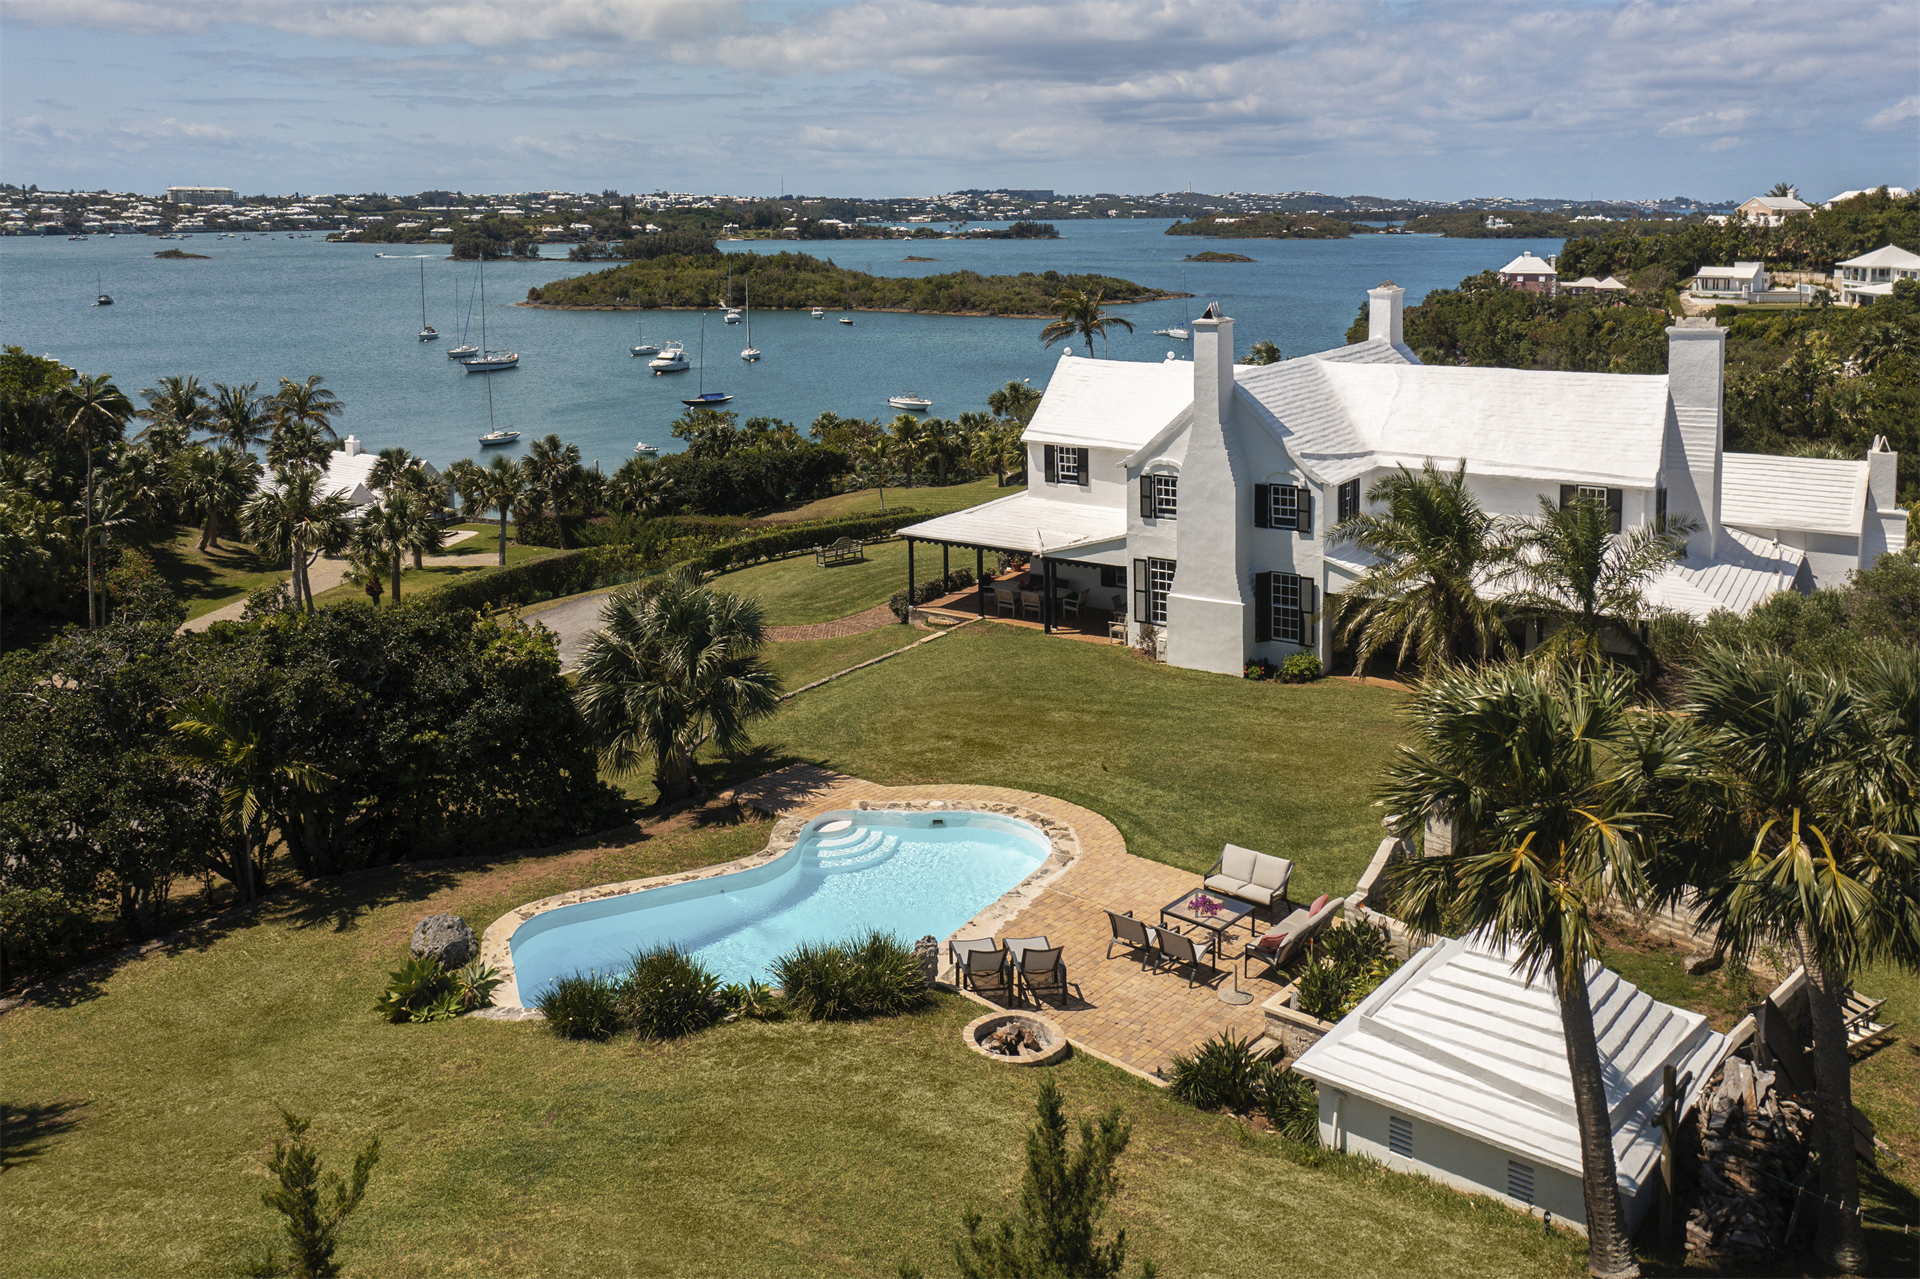 Property for Sale at Norwood On Hamilton Harbour Norwood On Hamilton Harbour, 34 Pitts Bay Road,Bermuda – Sinclair Realty